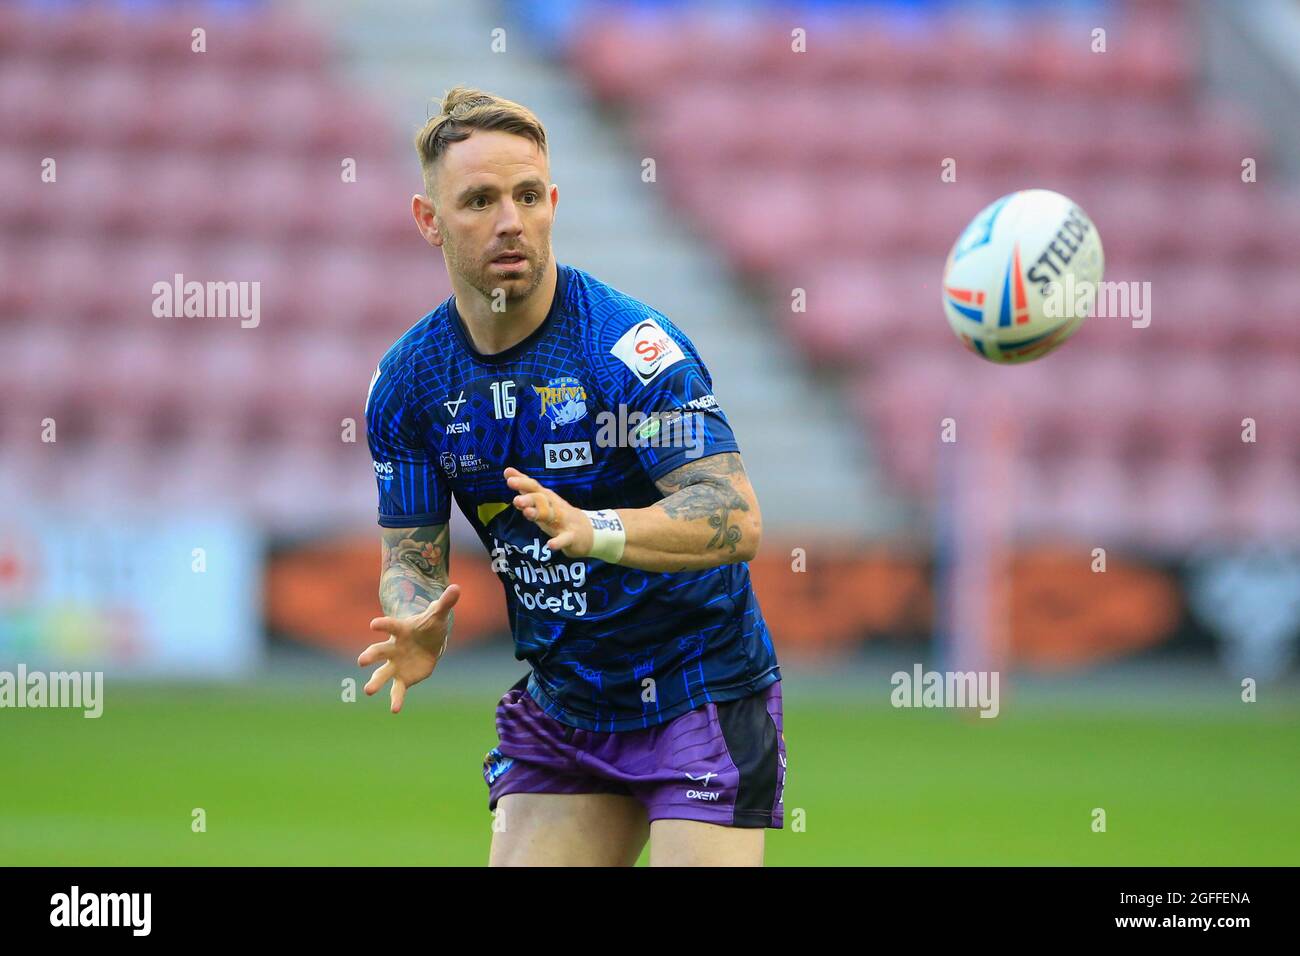 Wigan, UK. 25th Aug, 2021. Richie Myler (16) of Leeds Rhinos during the warm up for the game in Wigan, United Kingdom on 8/25/2021. (Photo by Conor Molloy/News Images/Sipa USA) Credit: Sipa USA/Alamy Live News Stock Photo